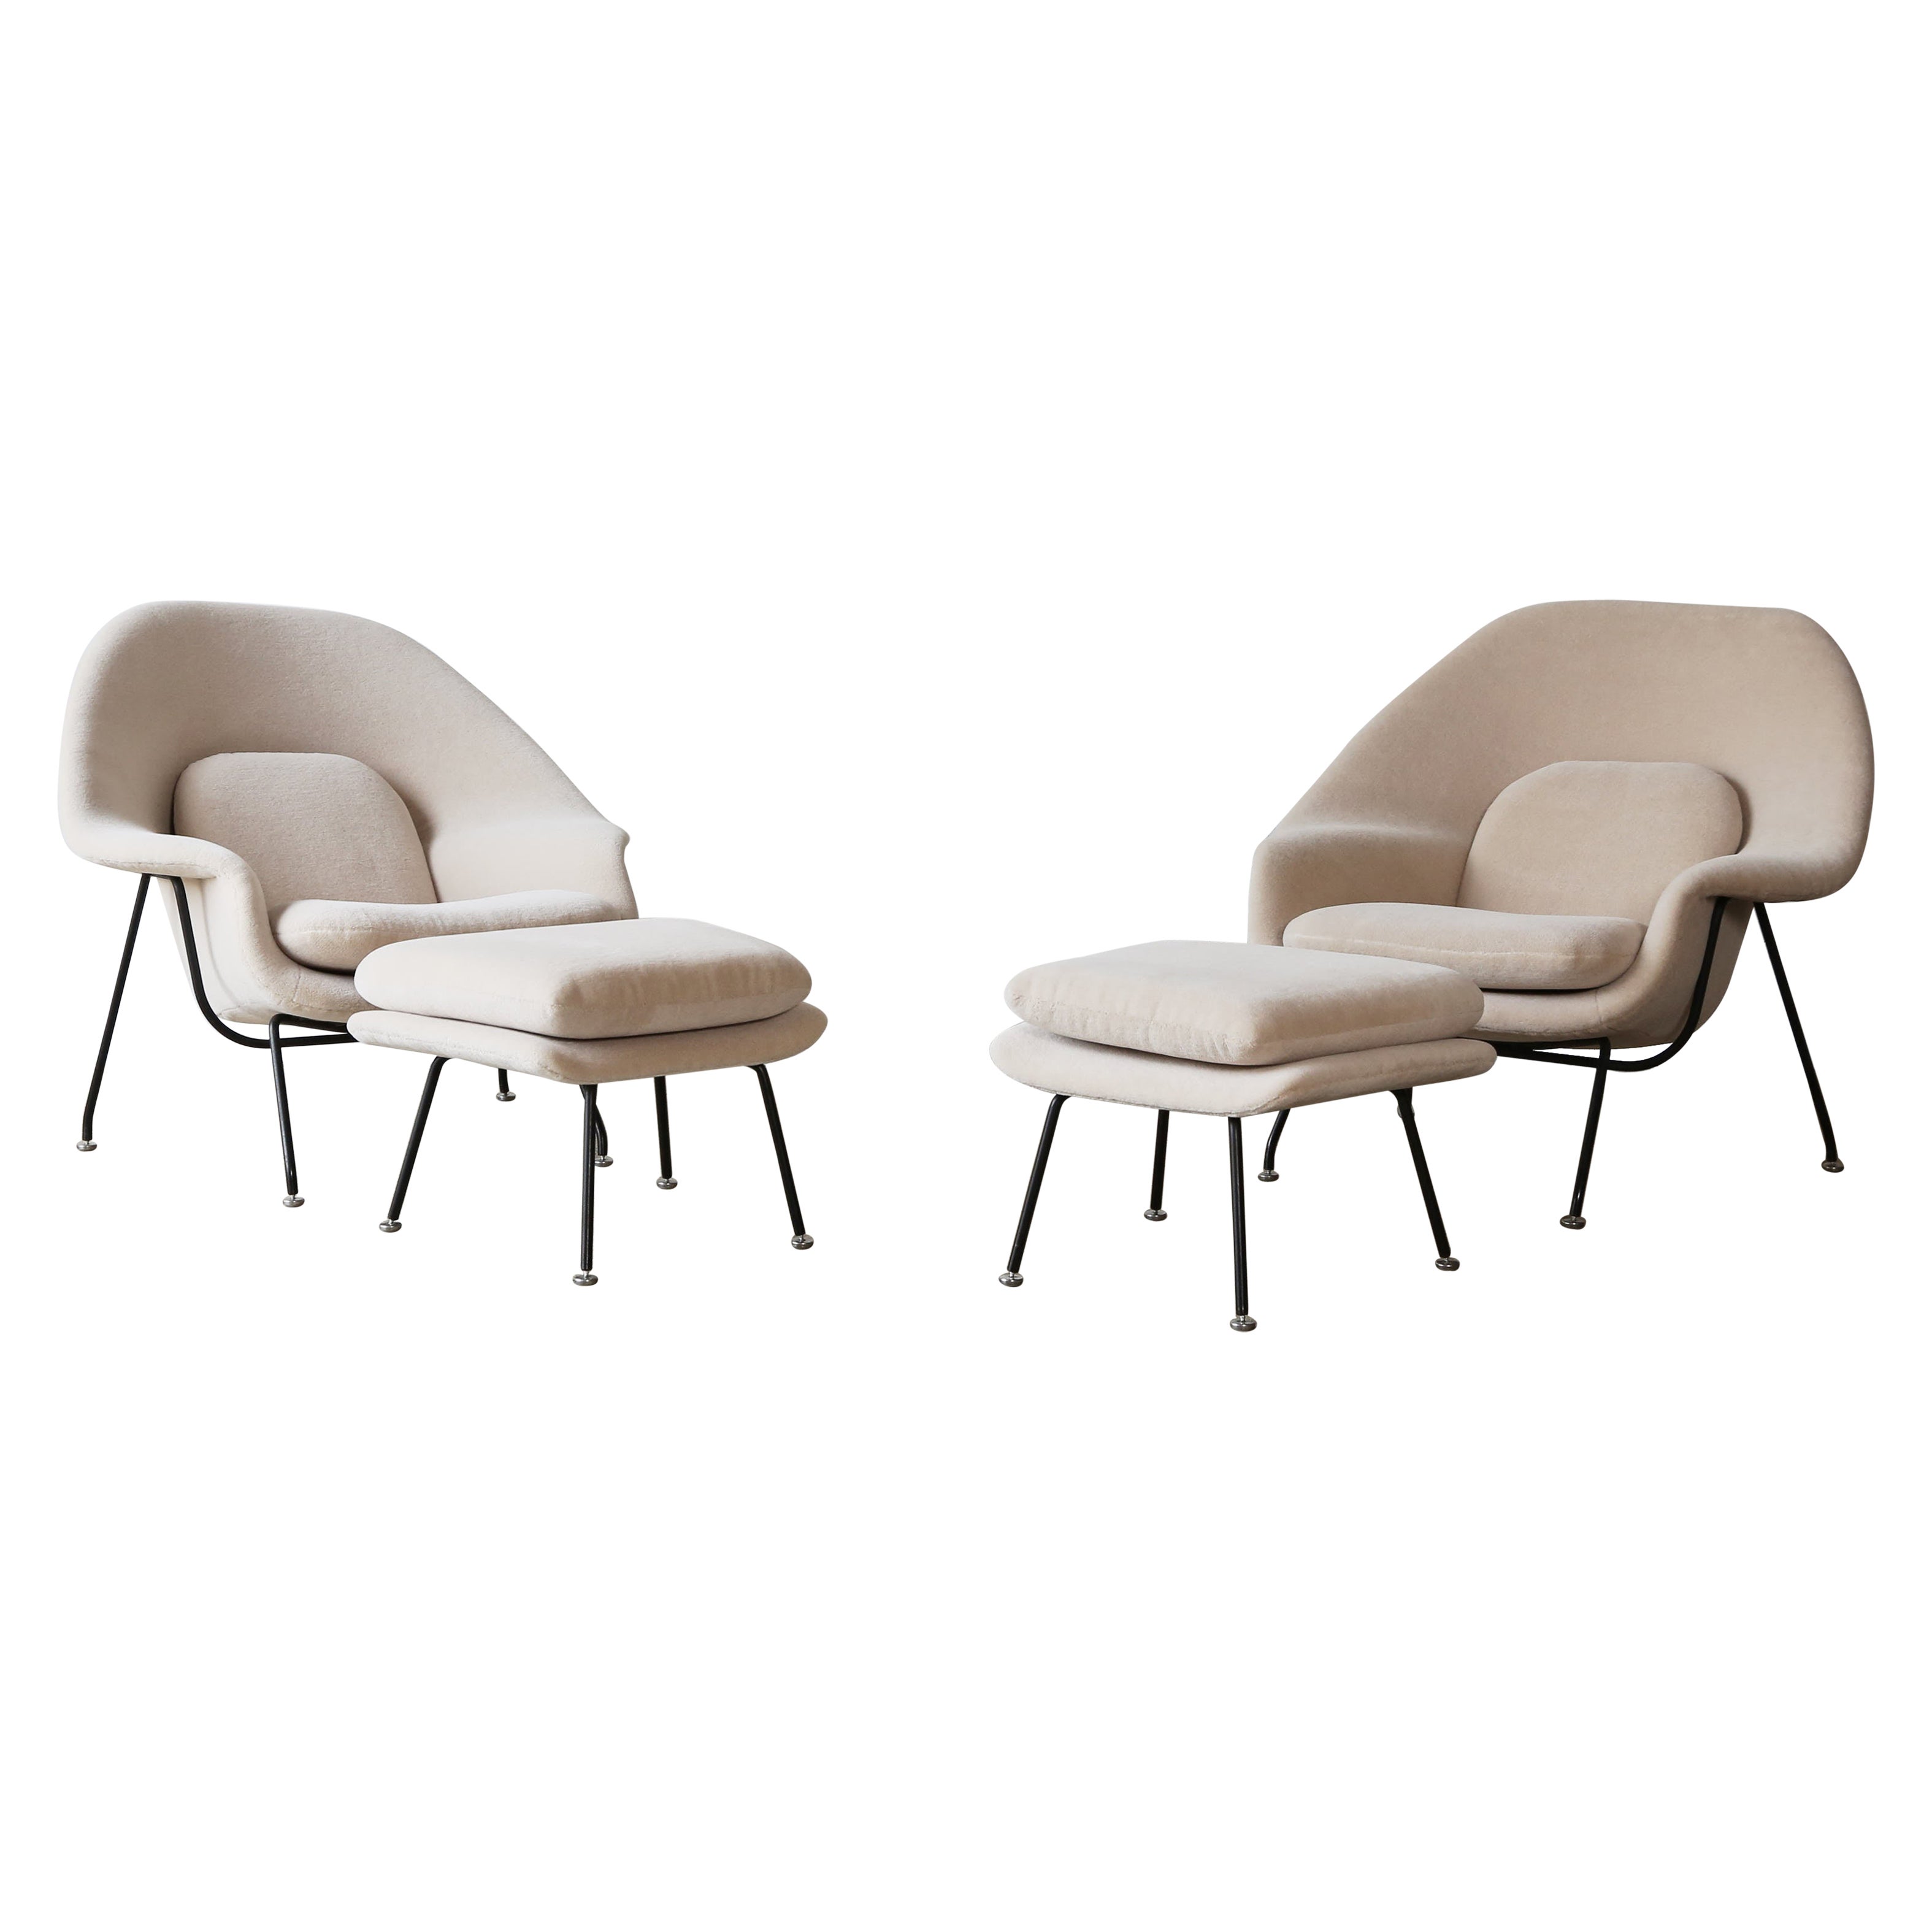 Rare Early Pair of Eero Saarinen Womb Chairs and Ottomans, Knoll, USA, 1950s